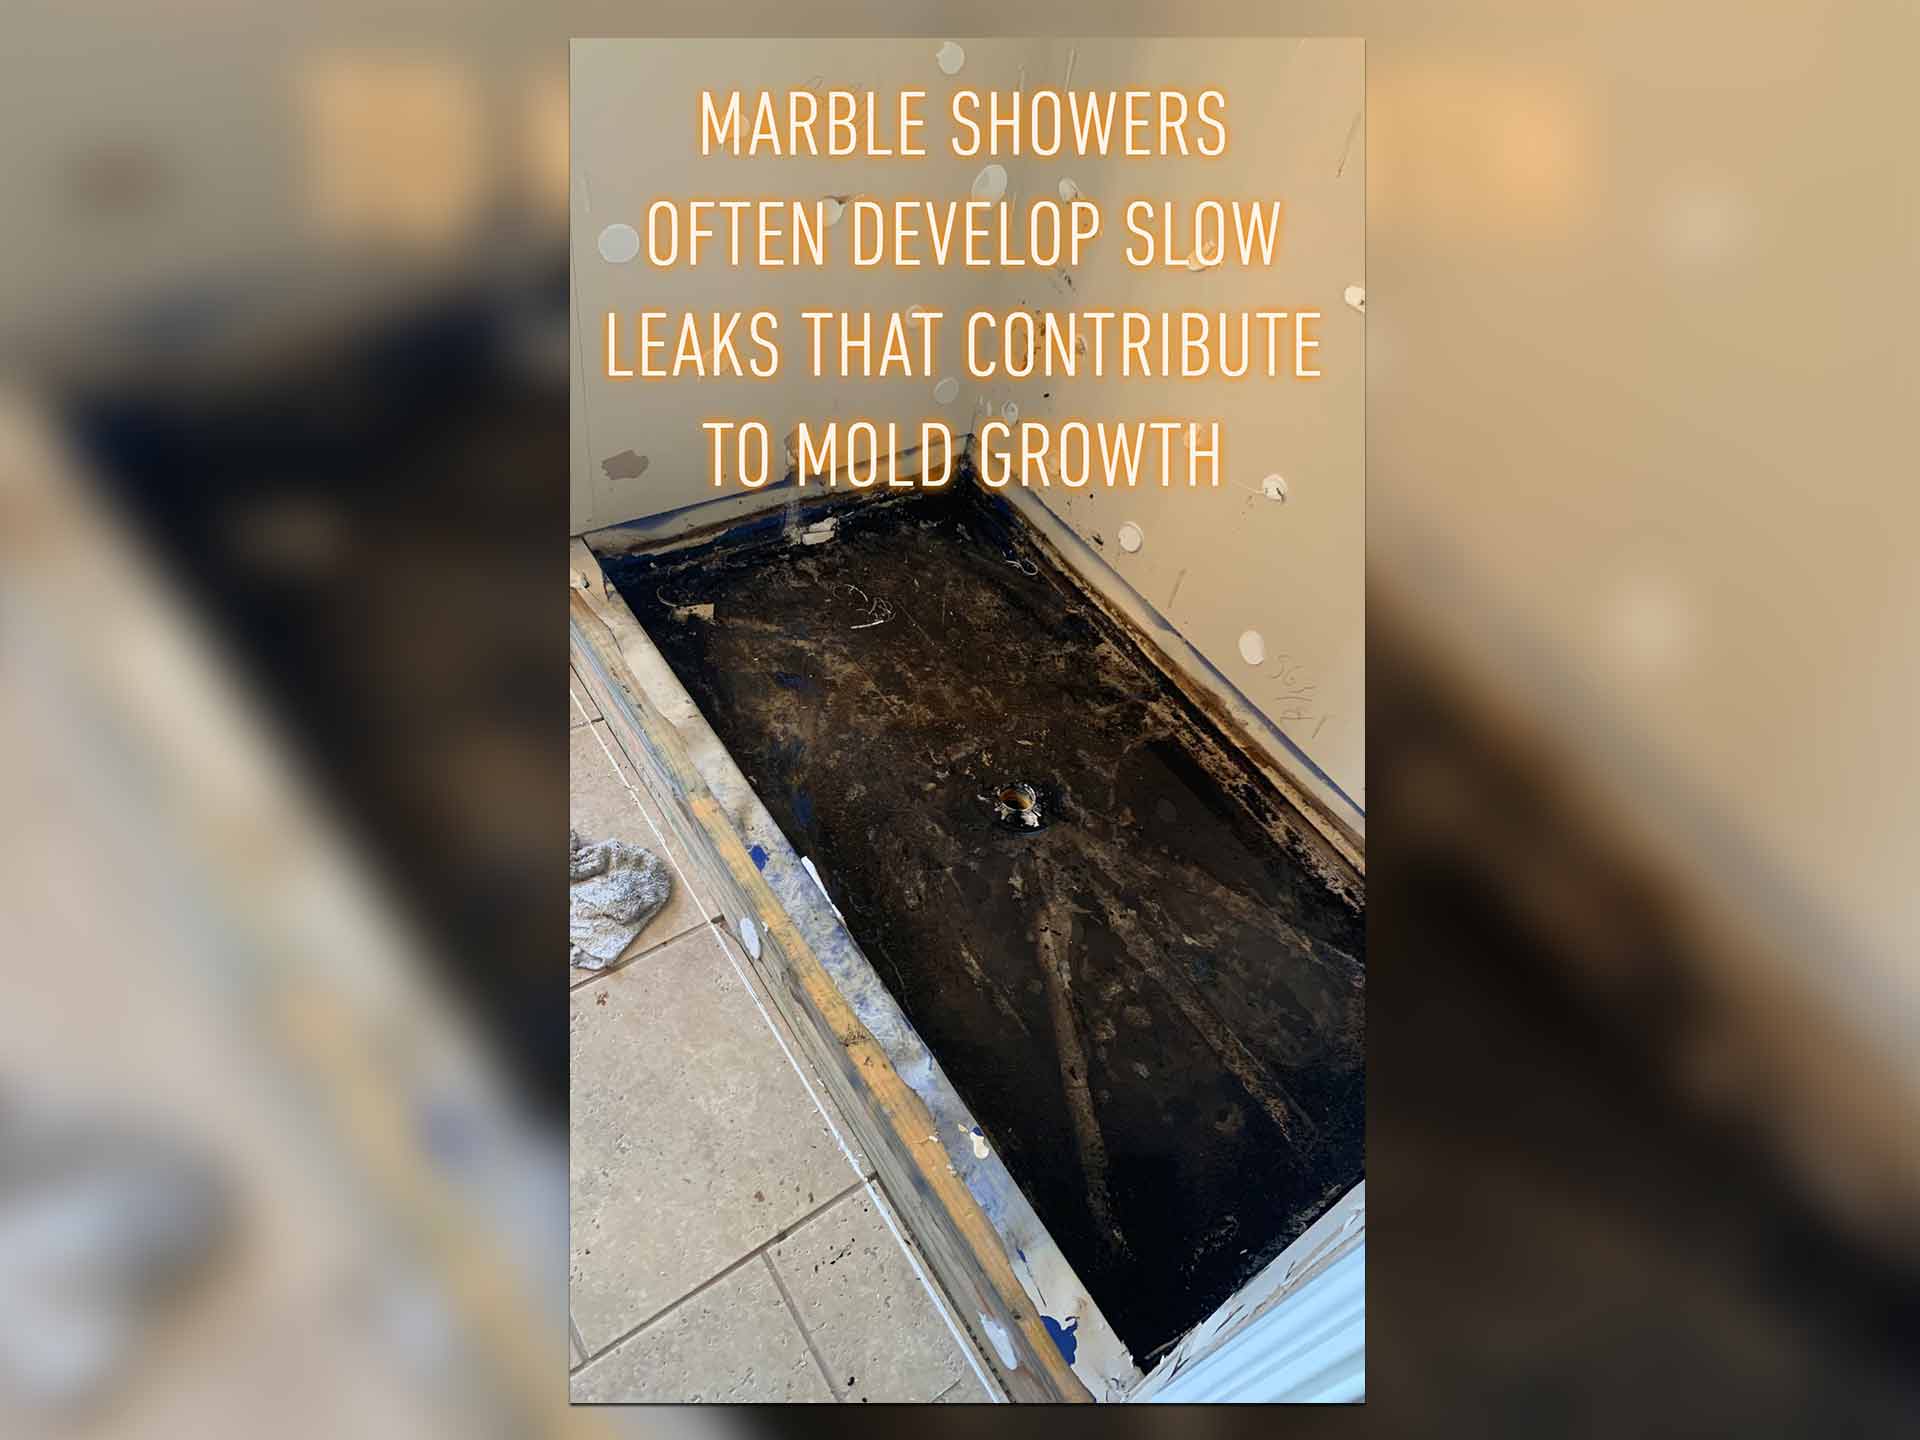 This marble shower developed a slow leak, which contributed to mold growth.